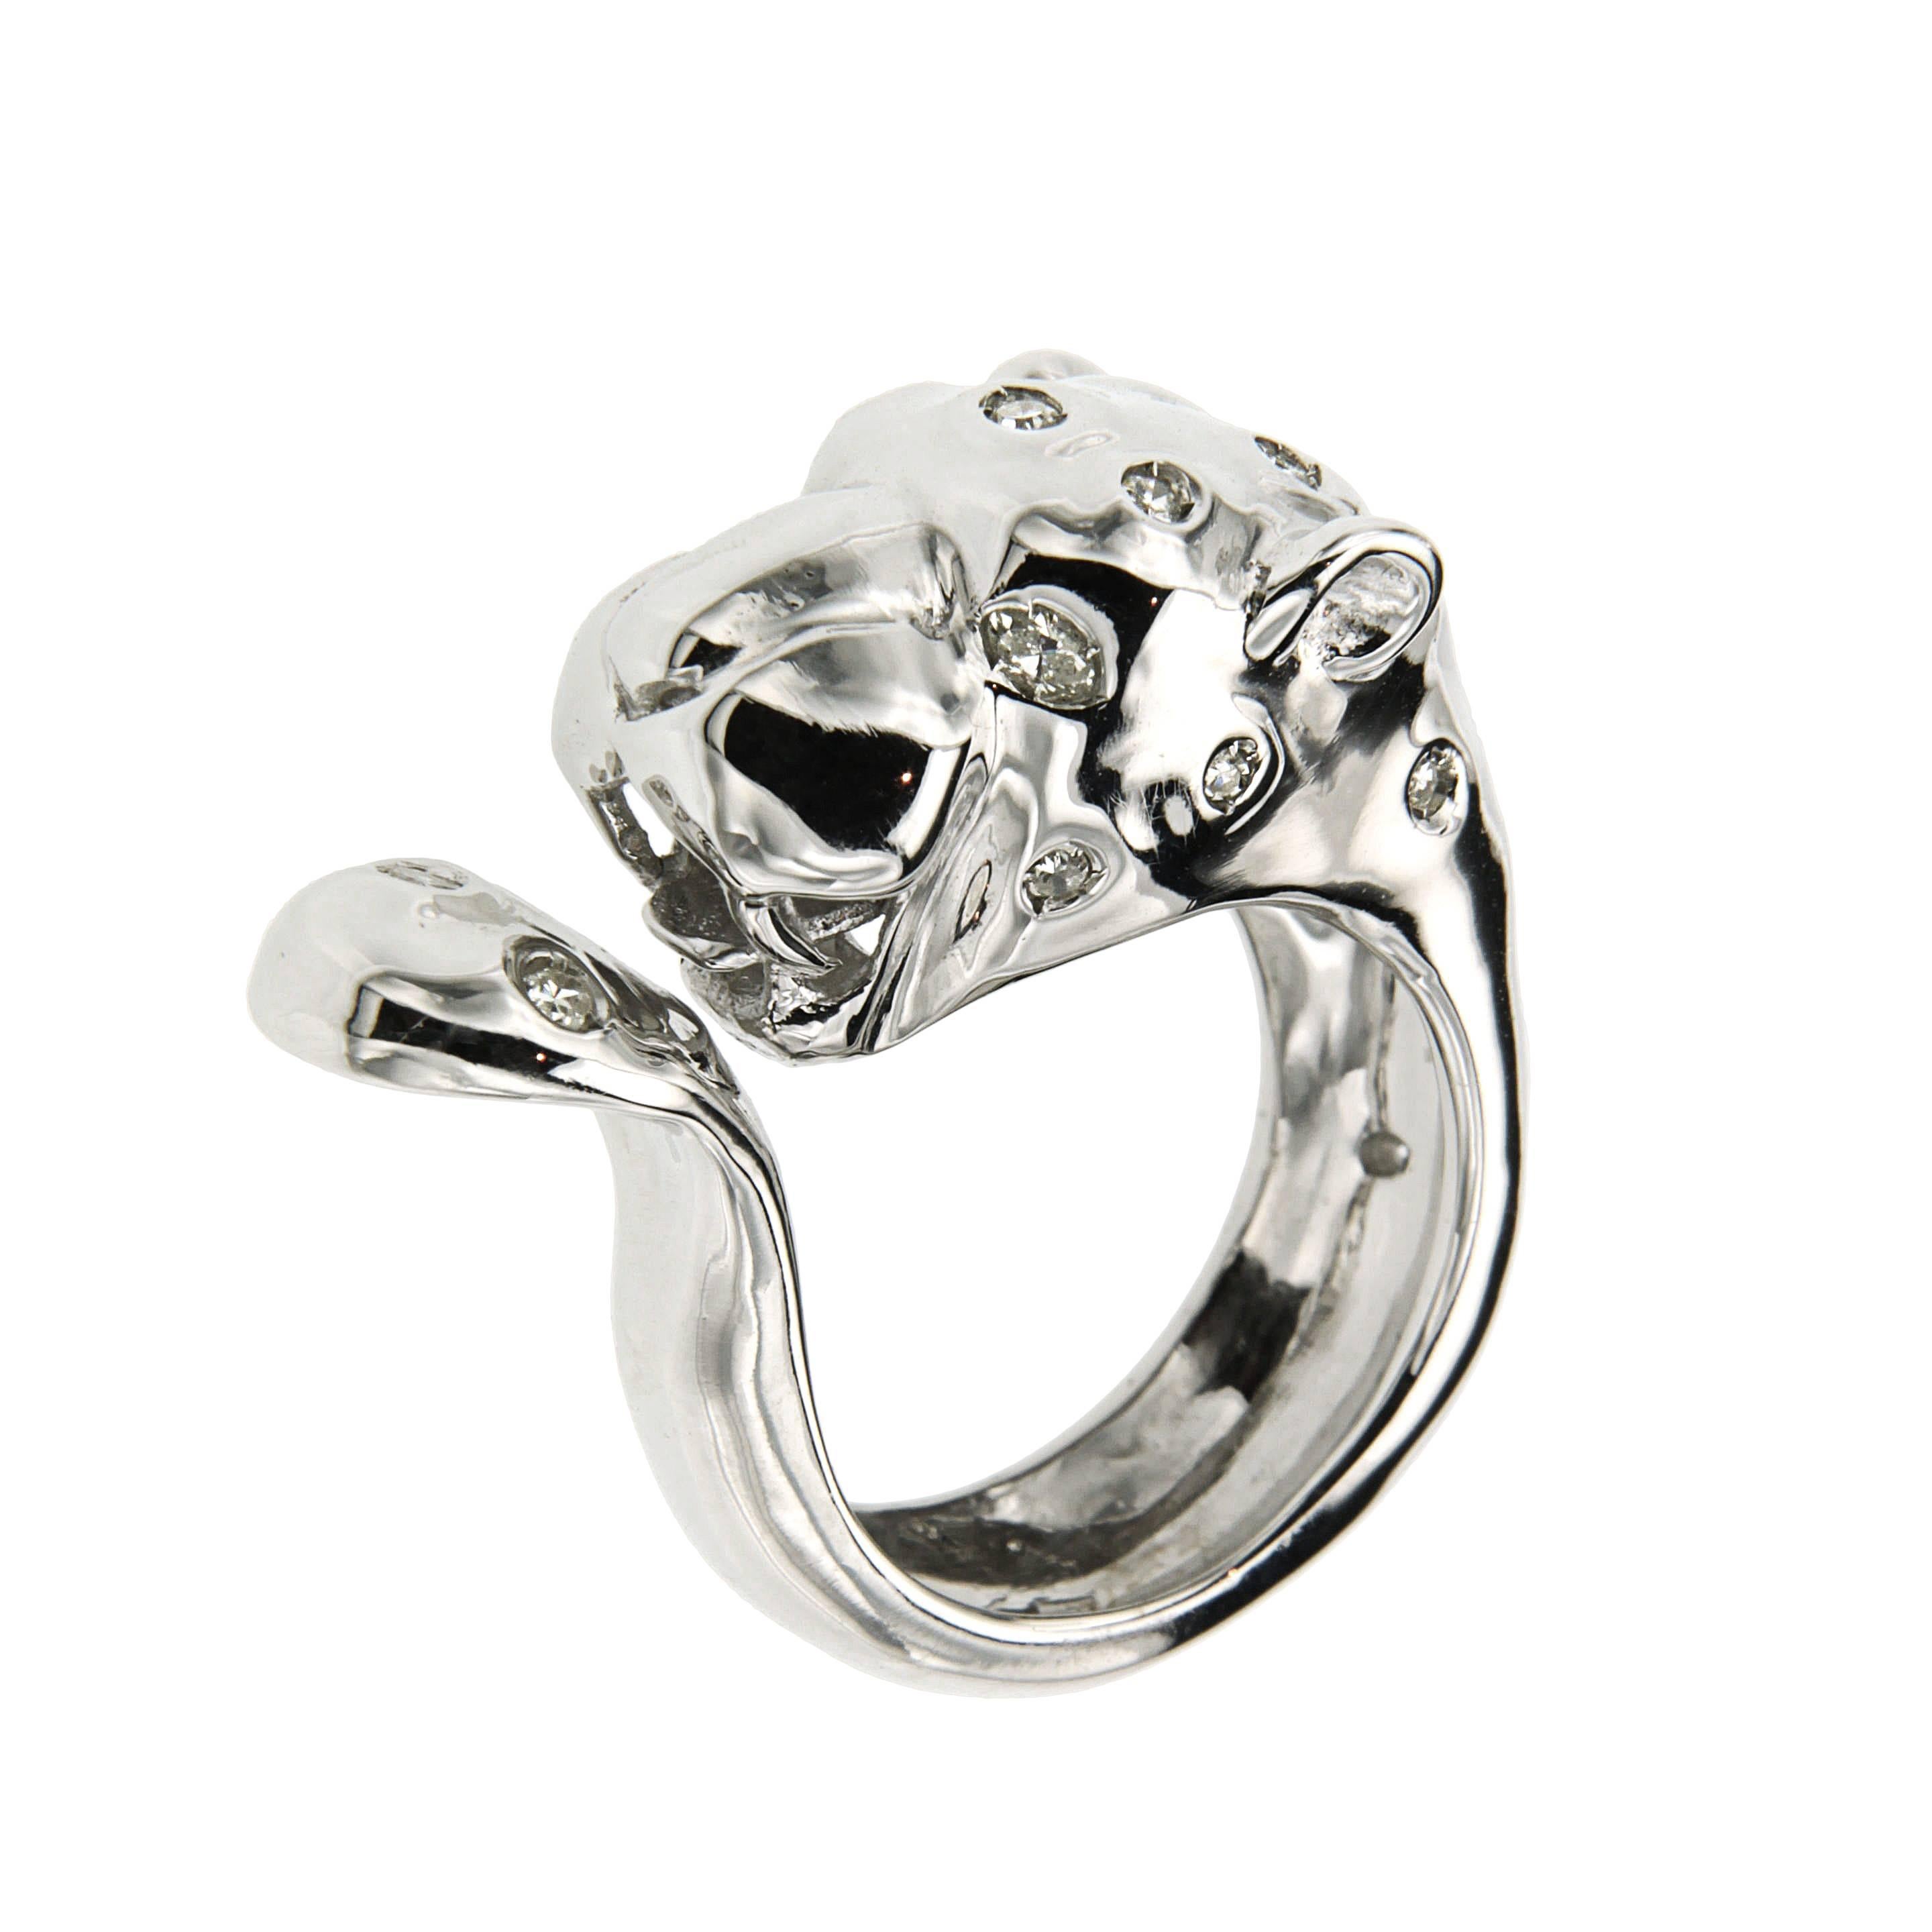 Diamonds 18 Kt White Gold Cheetah Ring Handcrafted in Italy by Botta Gioielli